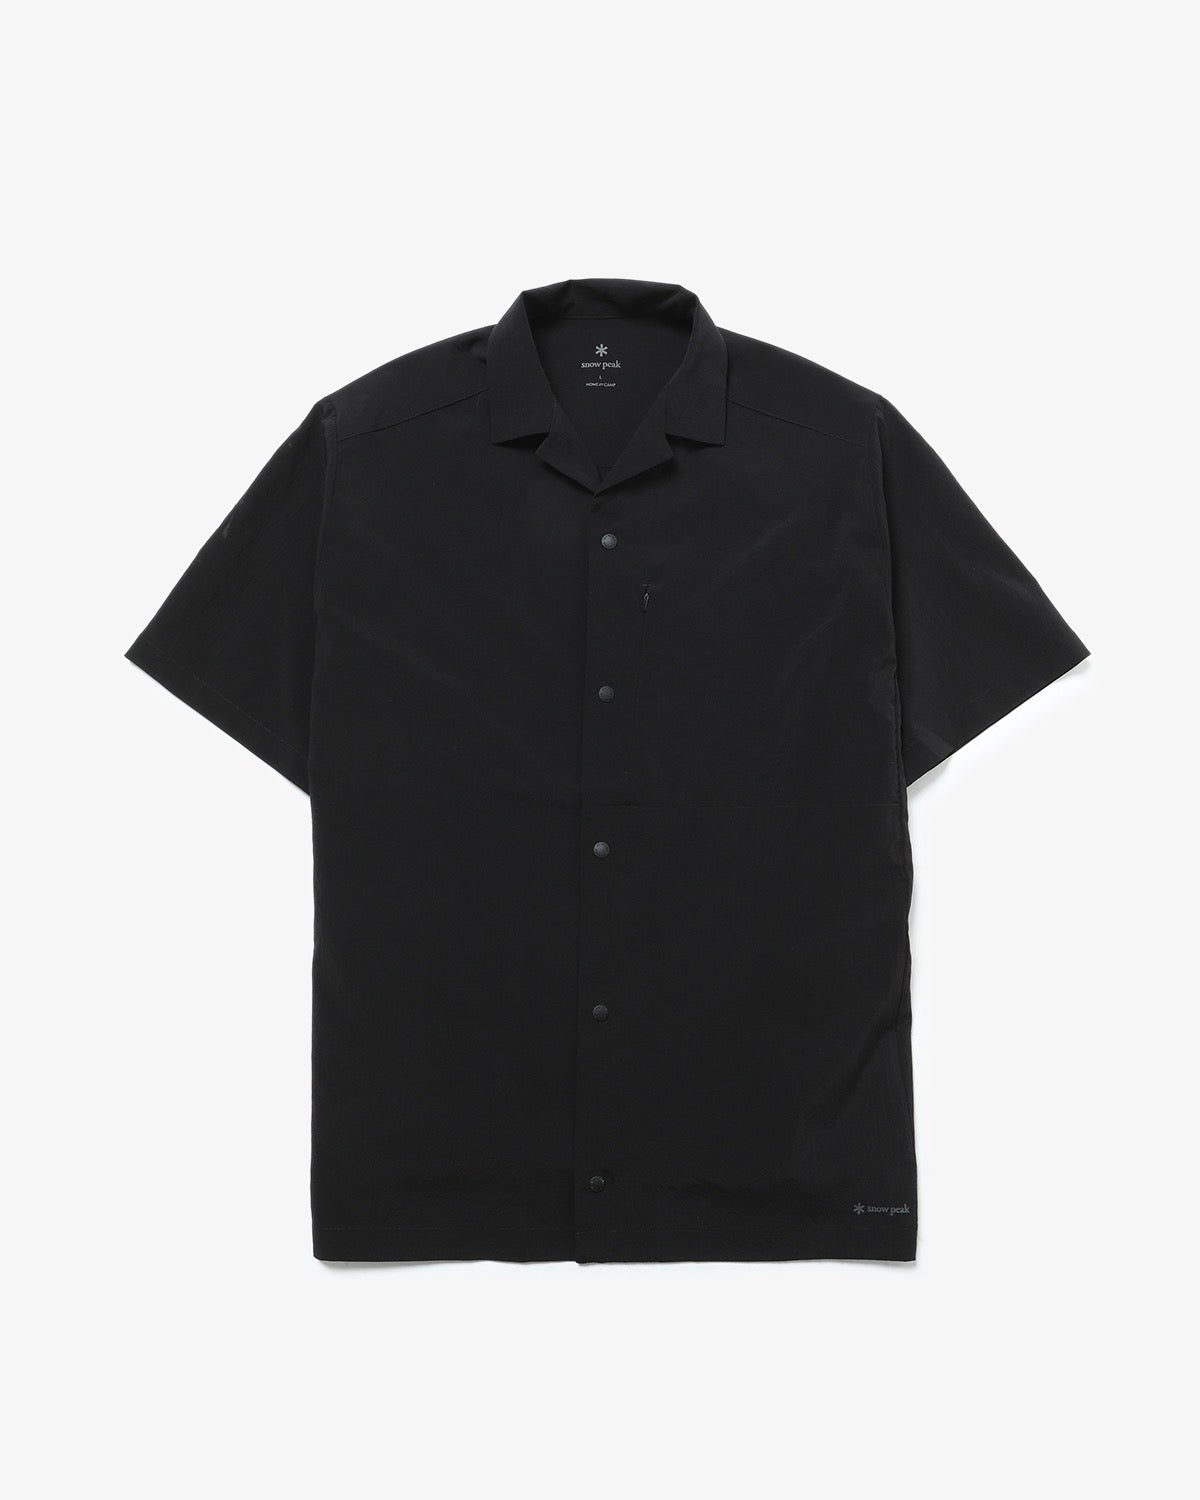 BREATHABLE QUICK DRY SHIRT